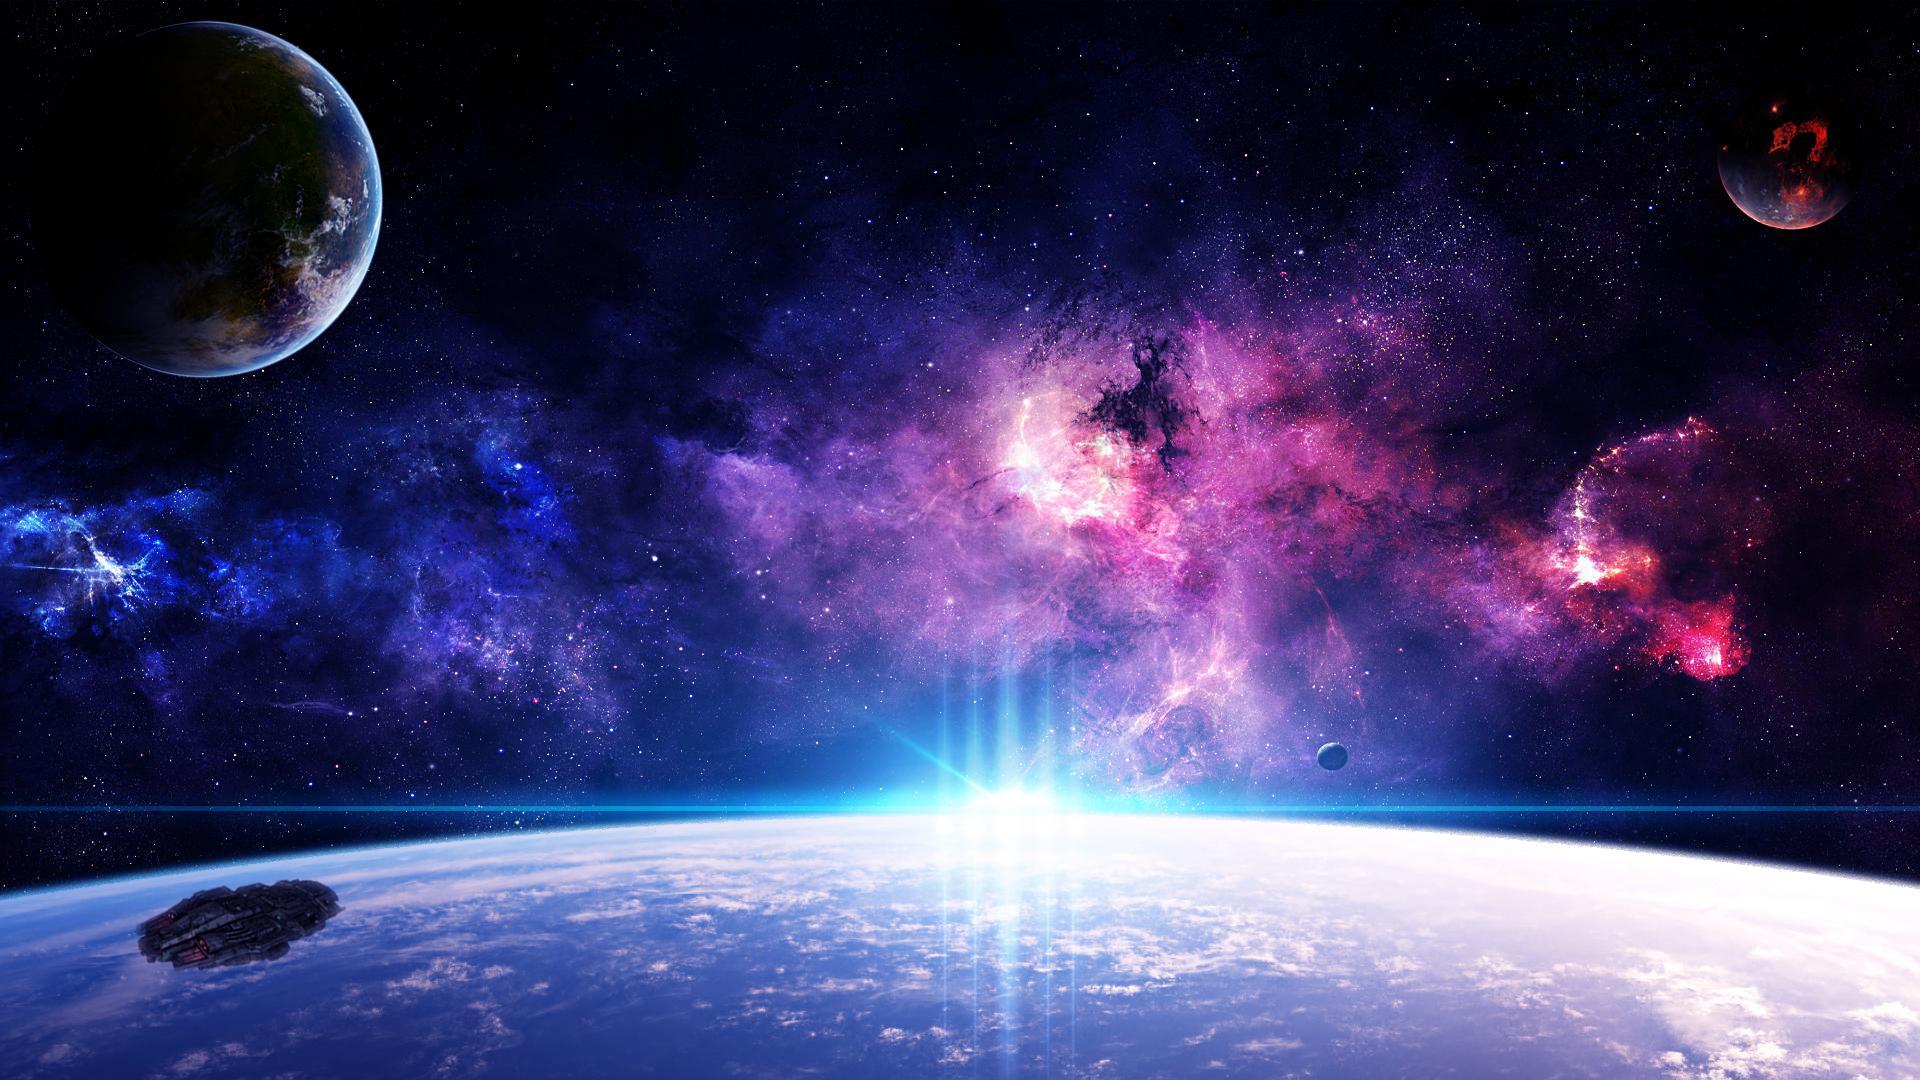 Image For > Hd Wallpapers 1080p Space